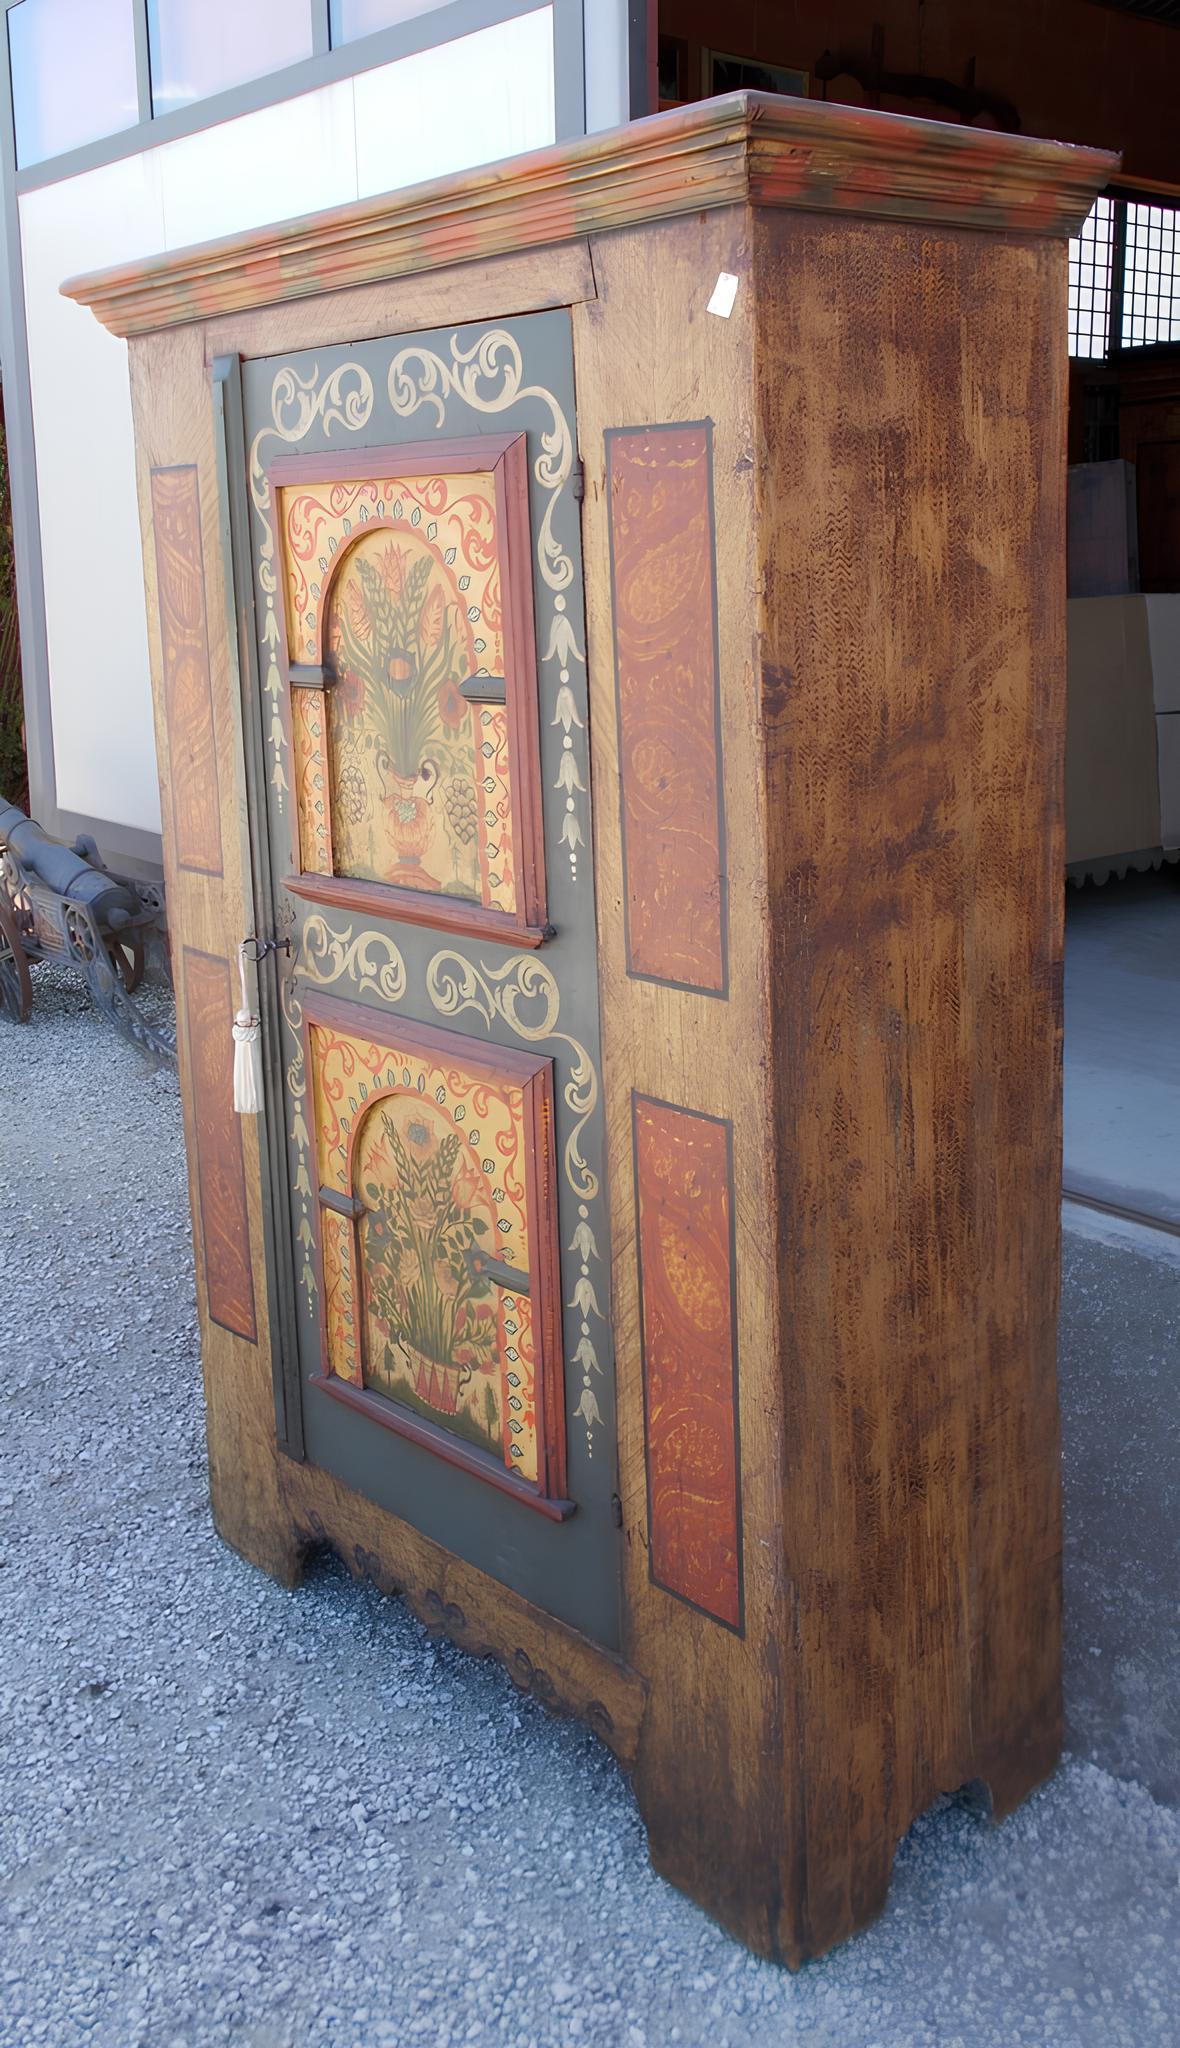 Small cabinet made of Spruce with finely painted door in relief.

Original hinges of the period, lock replaced.
Dating from the second half of the 1700s, originated from the Tyrolean Alpine area.
It is presented in good condition.

Finely painted by